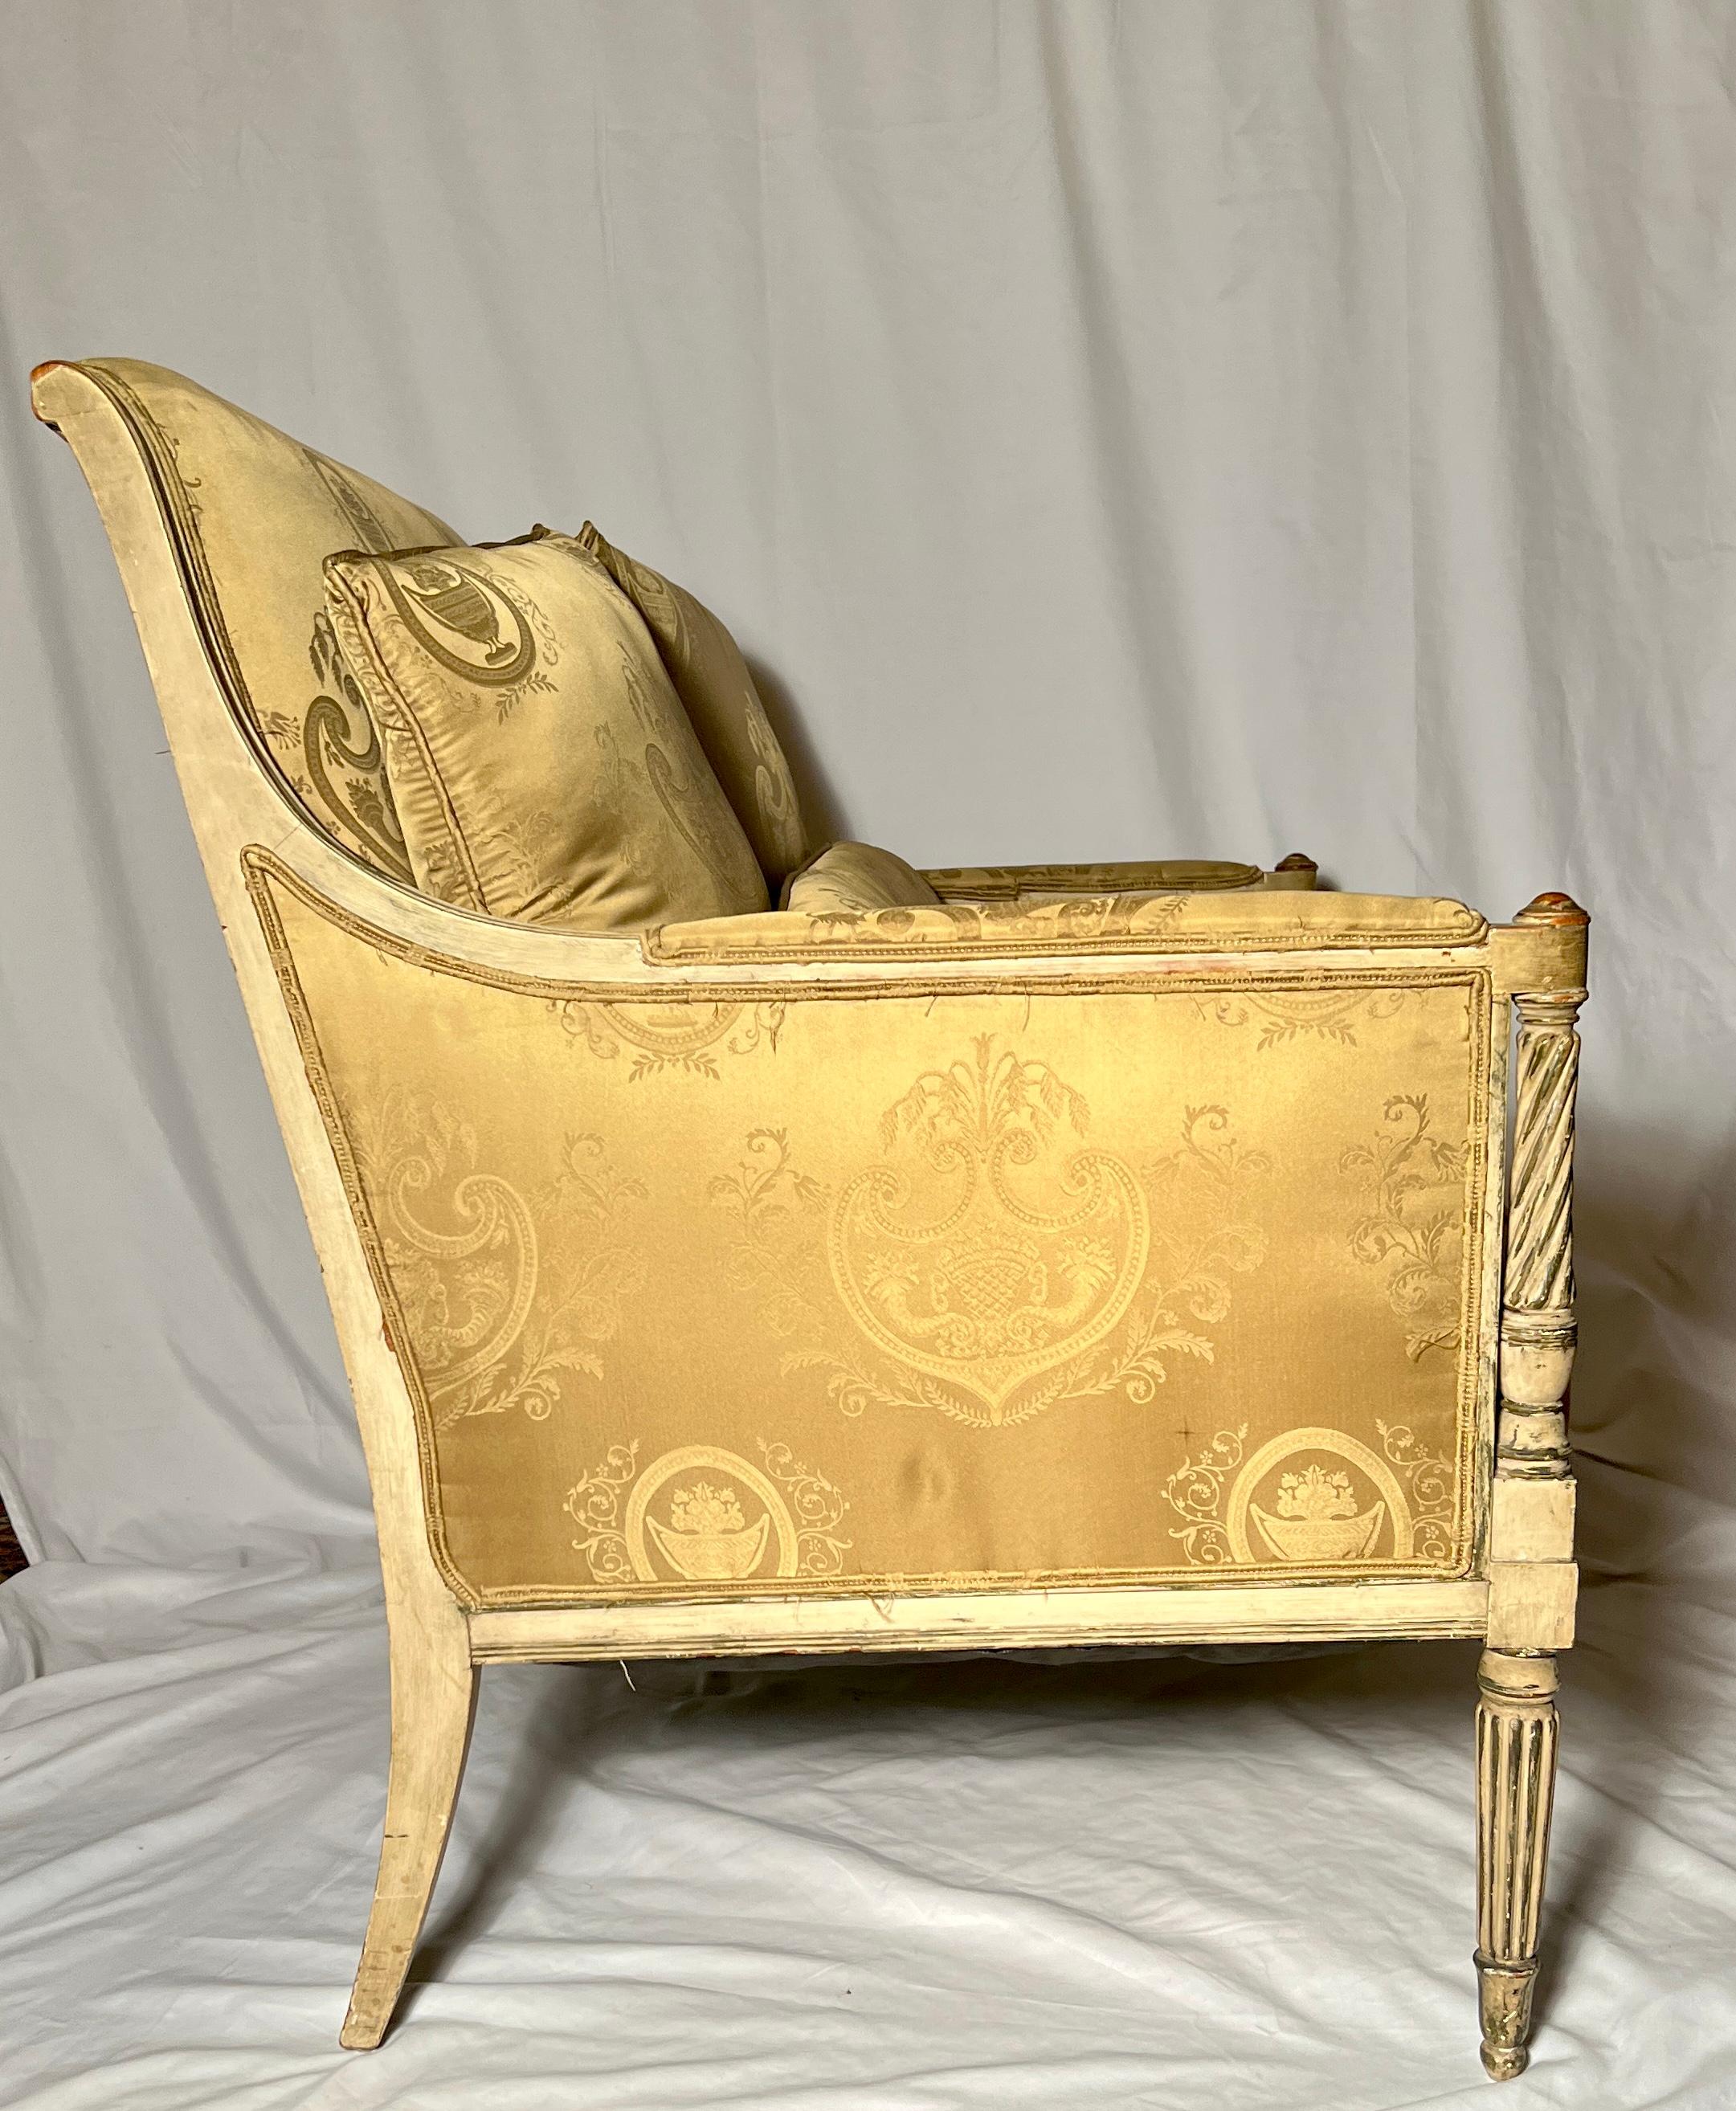 Antique French Directoire Style Painted Marquise Armchair, Circa 1870.
Fine yellow silk upholstery.